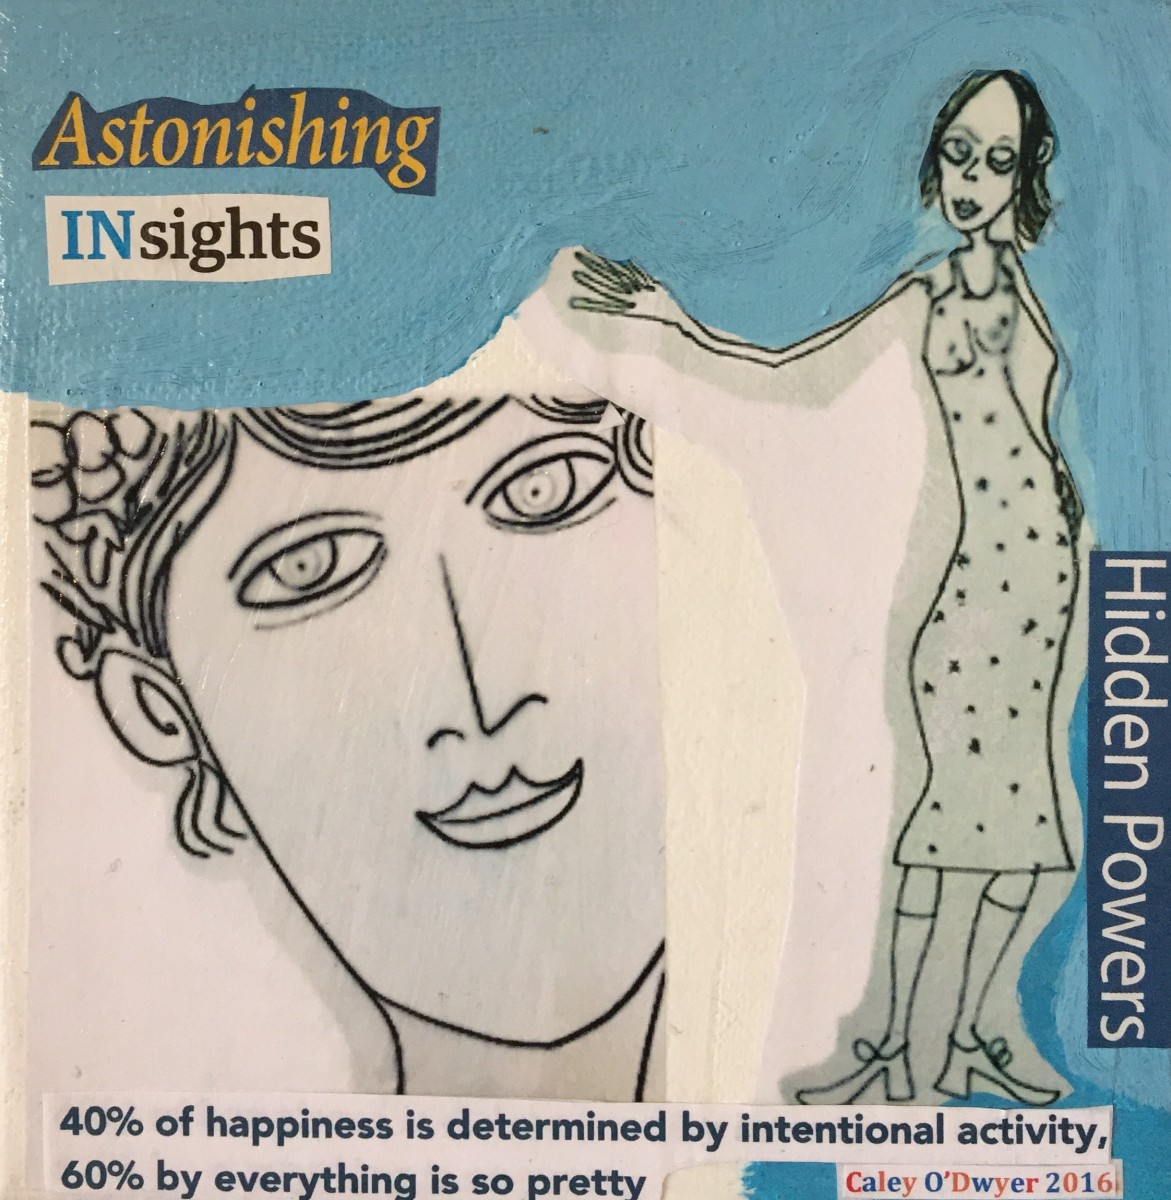 Experiments in Positive Psychology (Astonishing Insights) by Caley O'Dwyer 